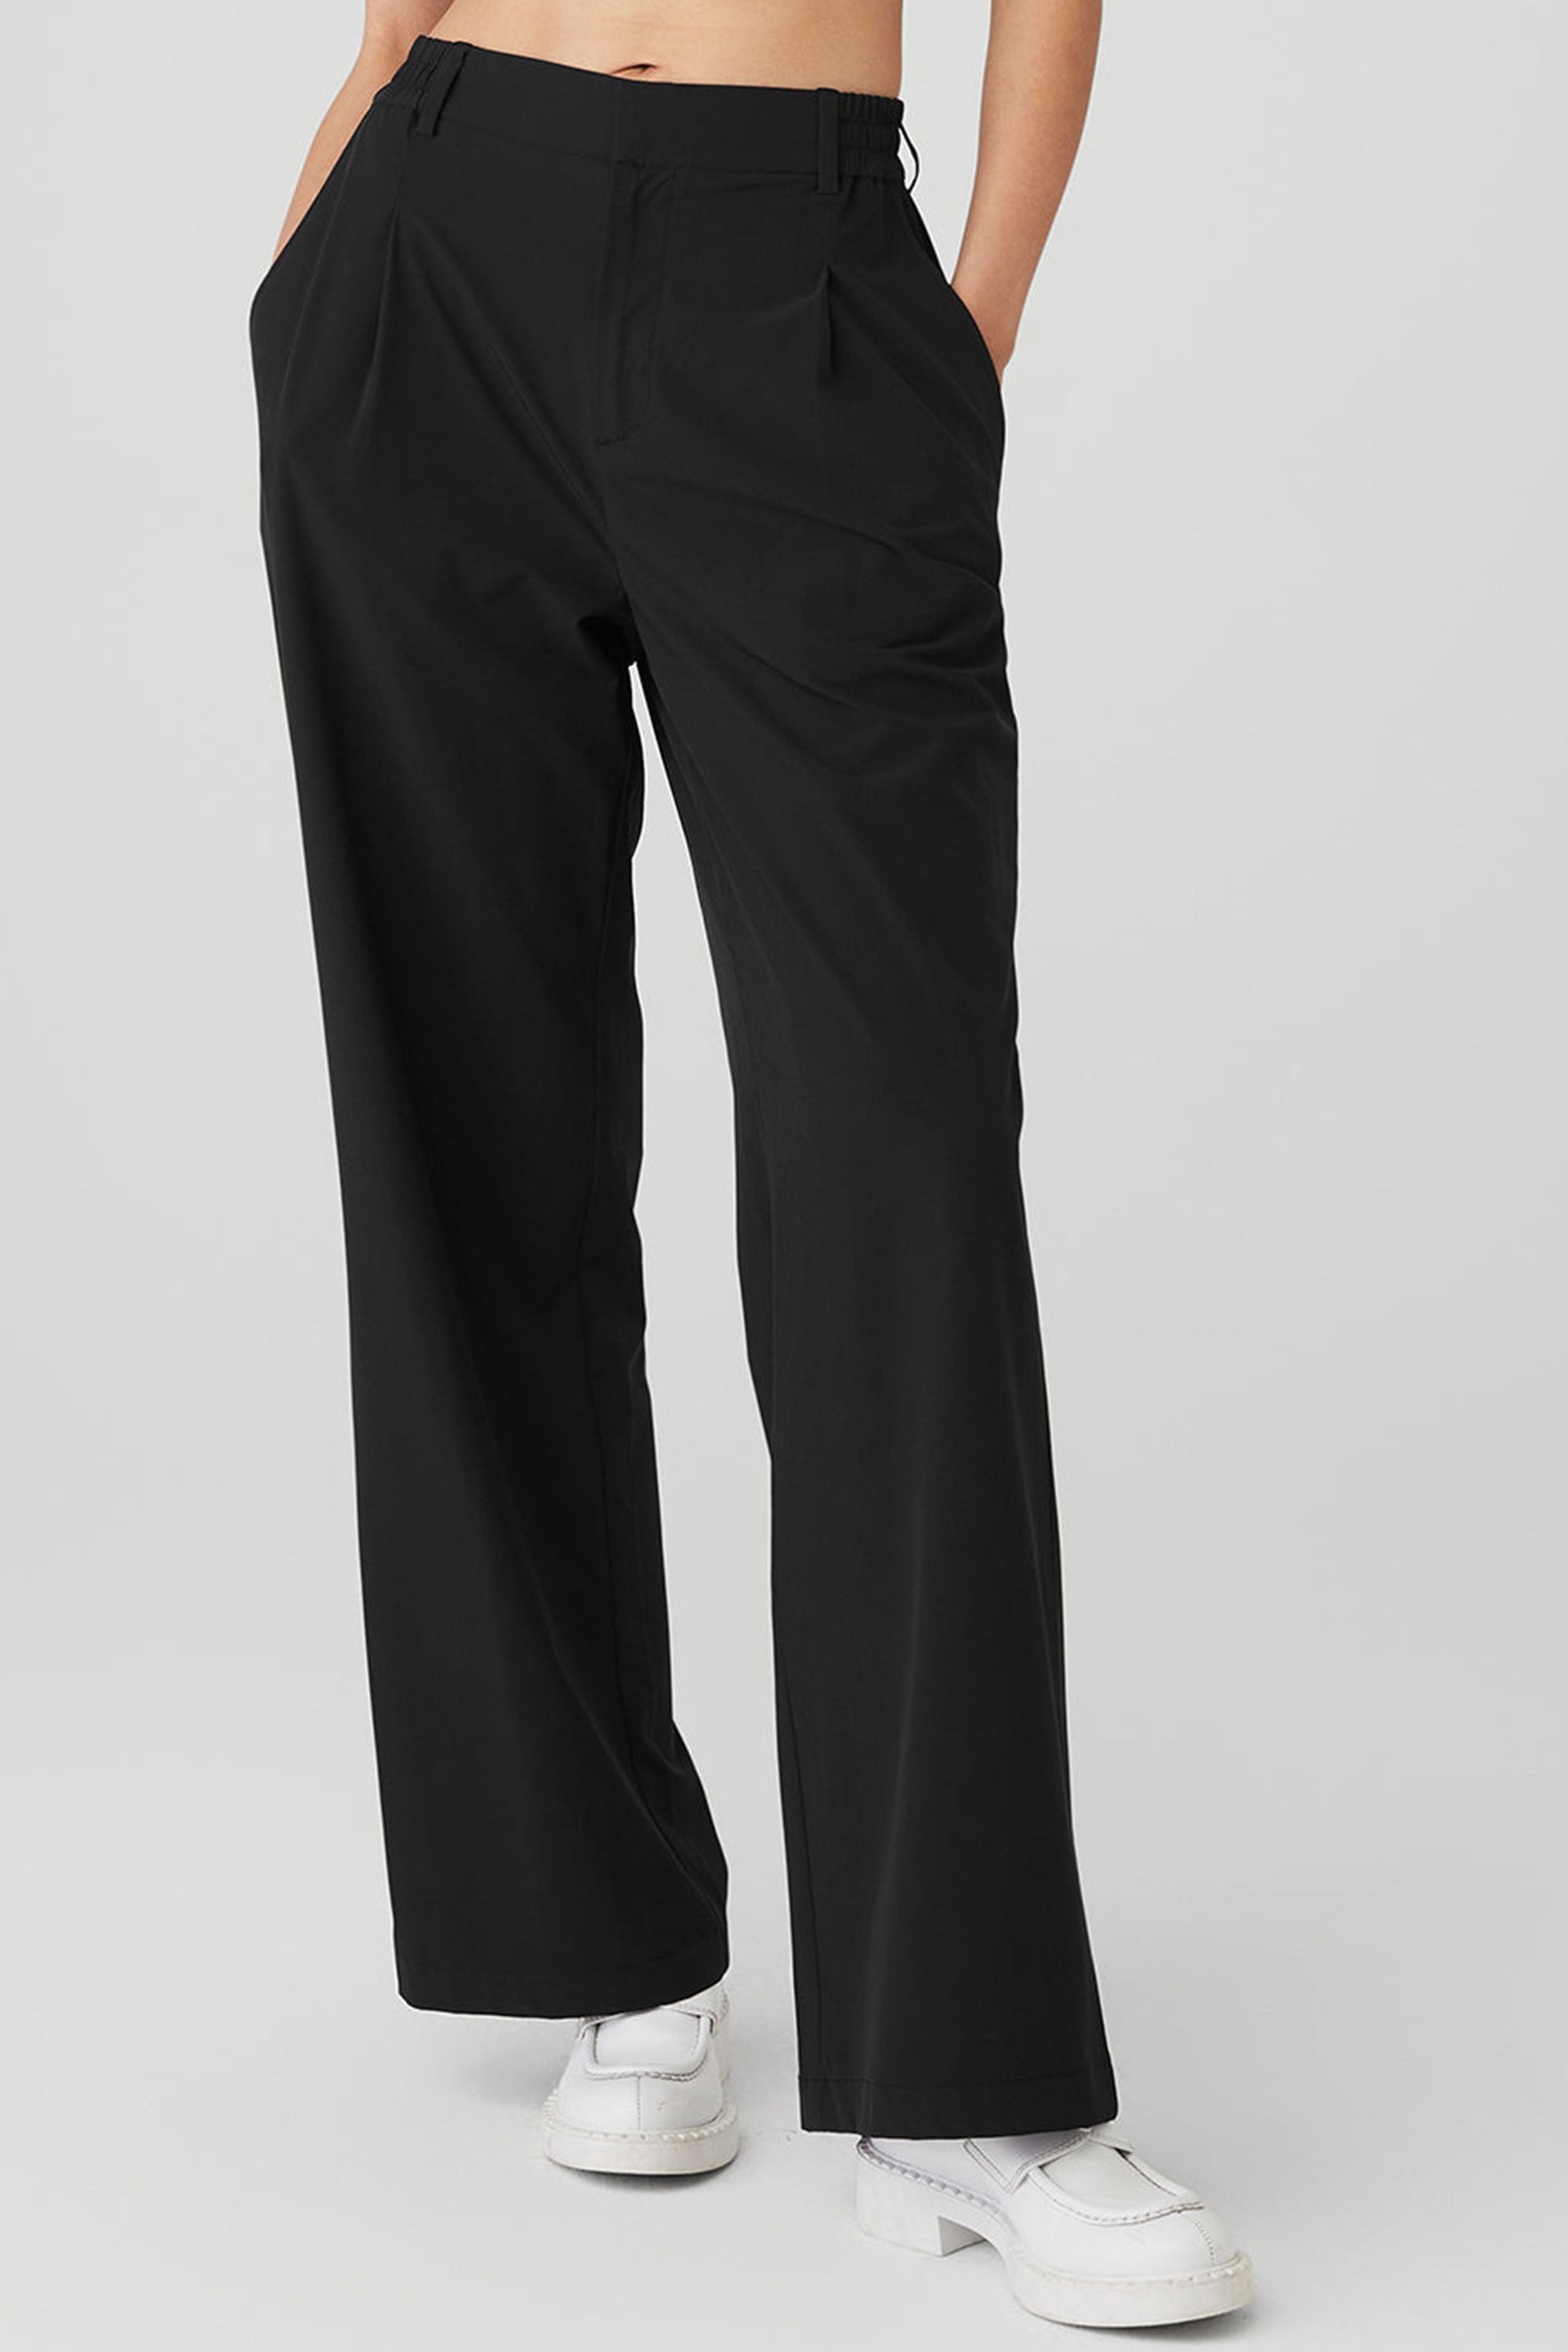 cotton baggy trousers